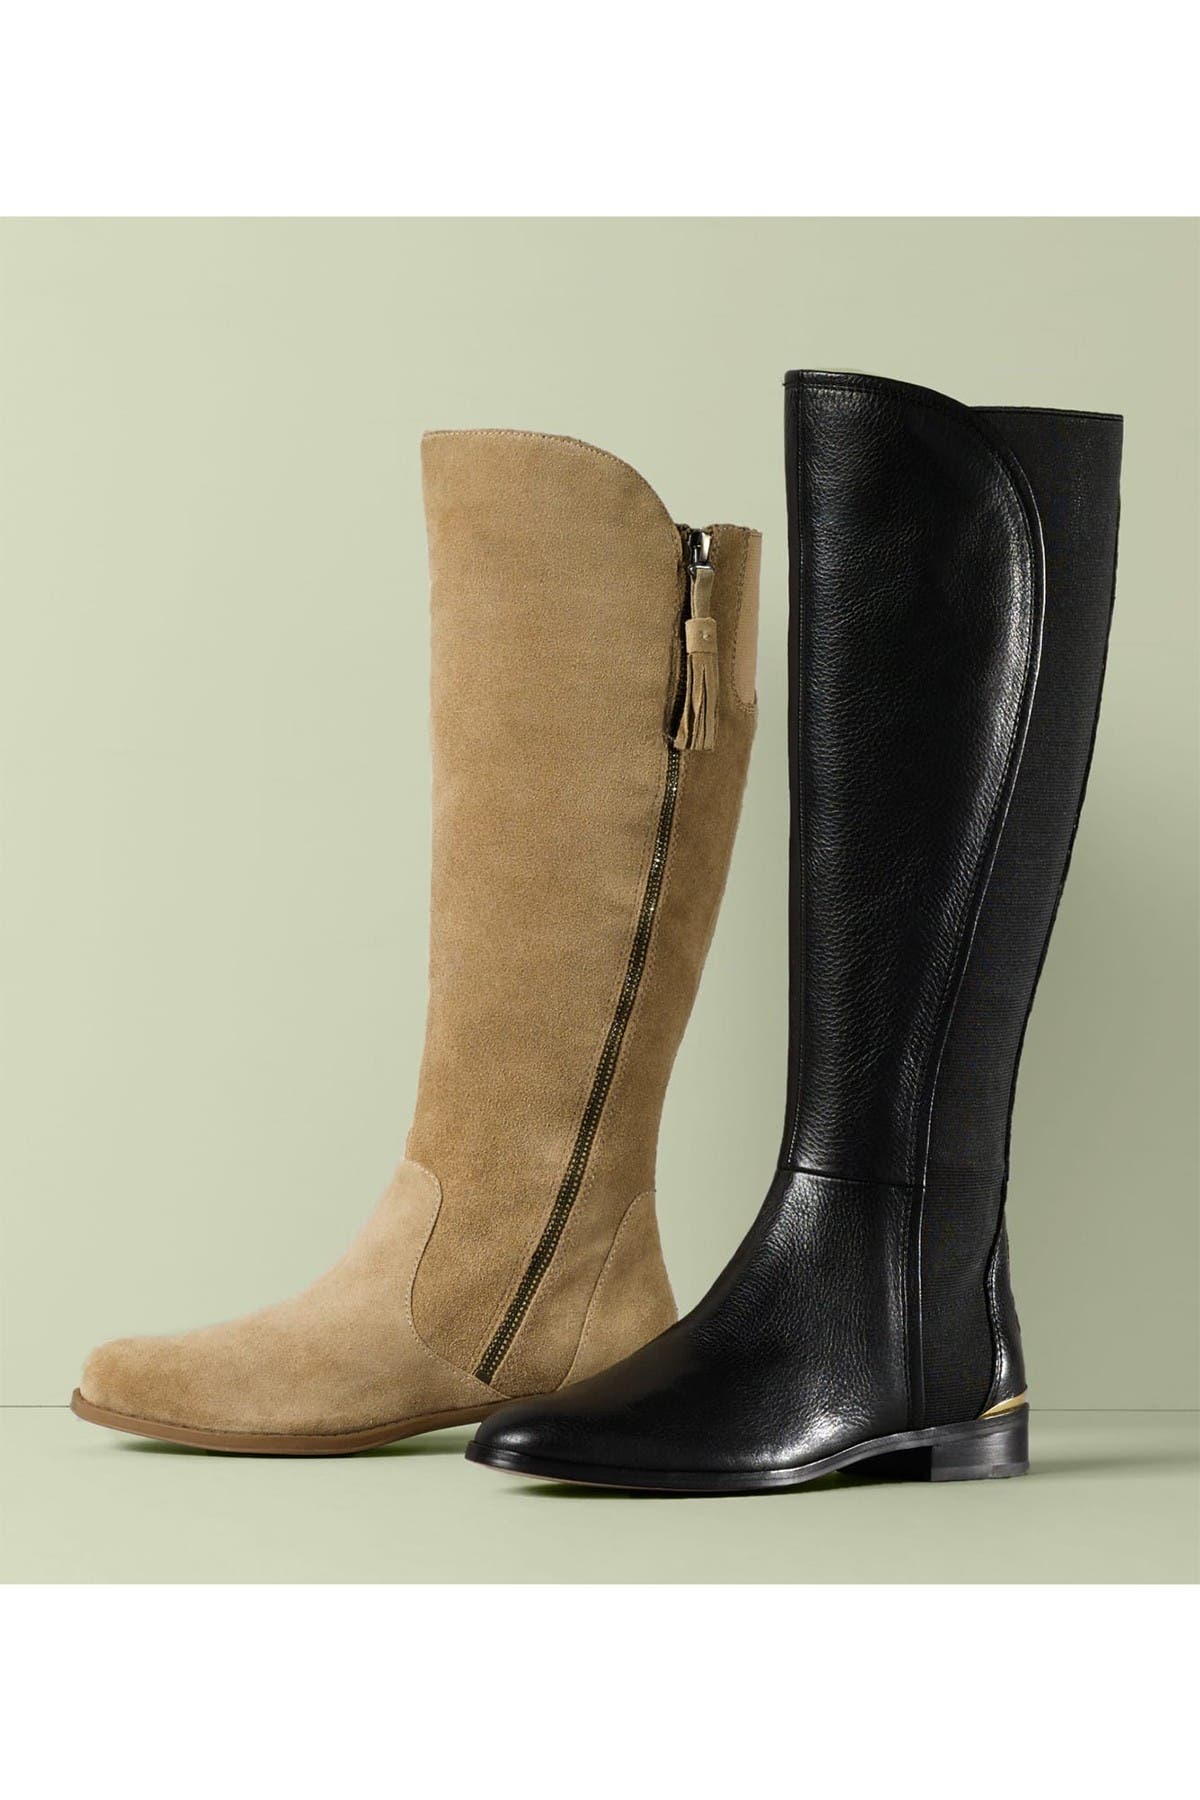 louise et cie vallery boot